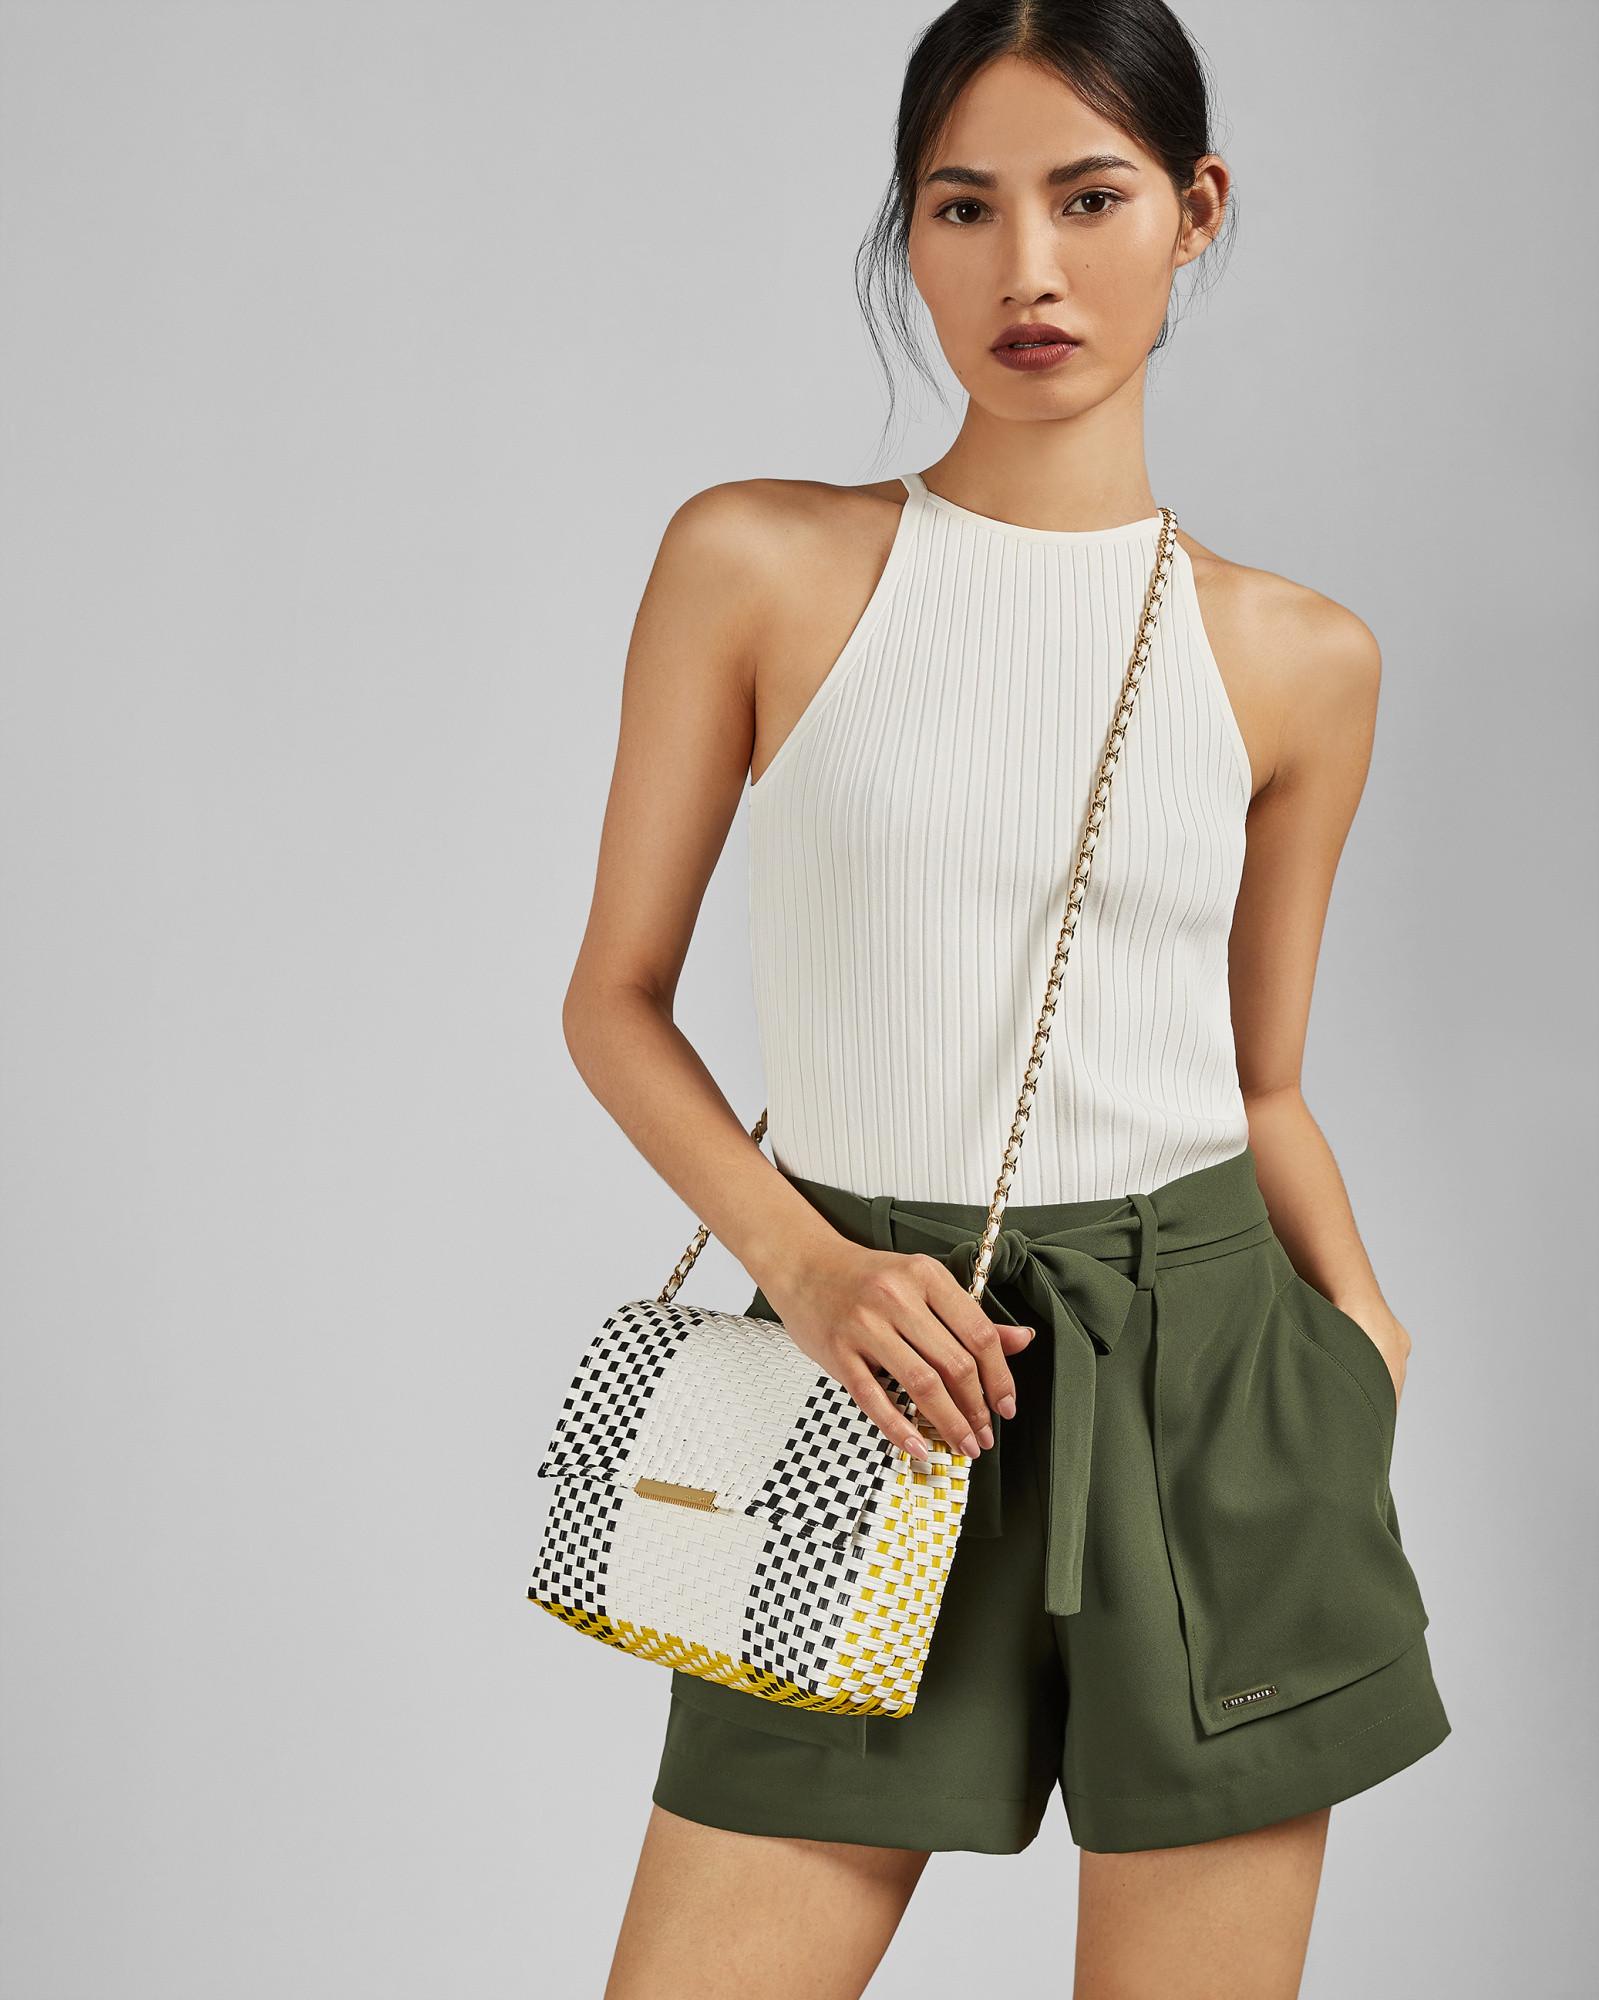 Ted Baker Woven Clutch Bag in White - Lyst